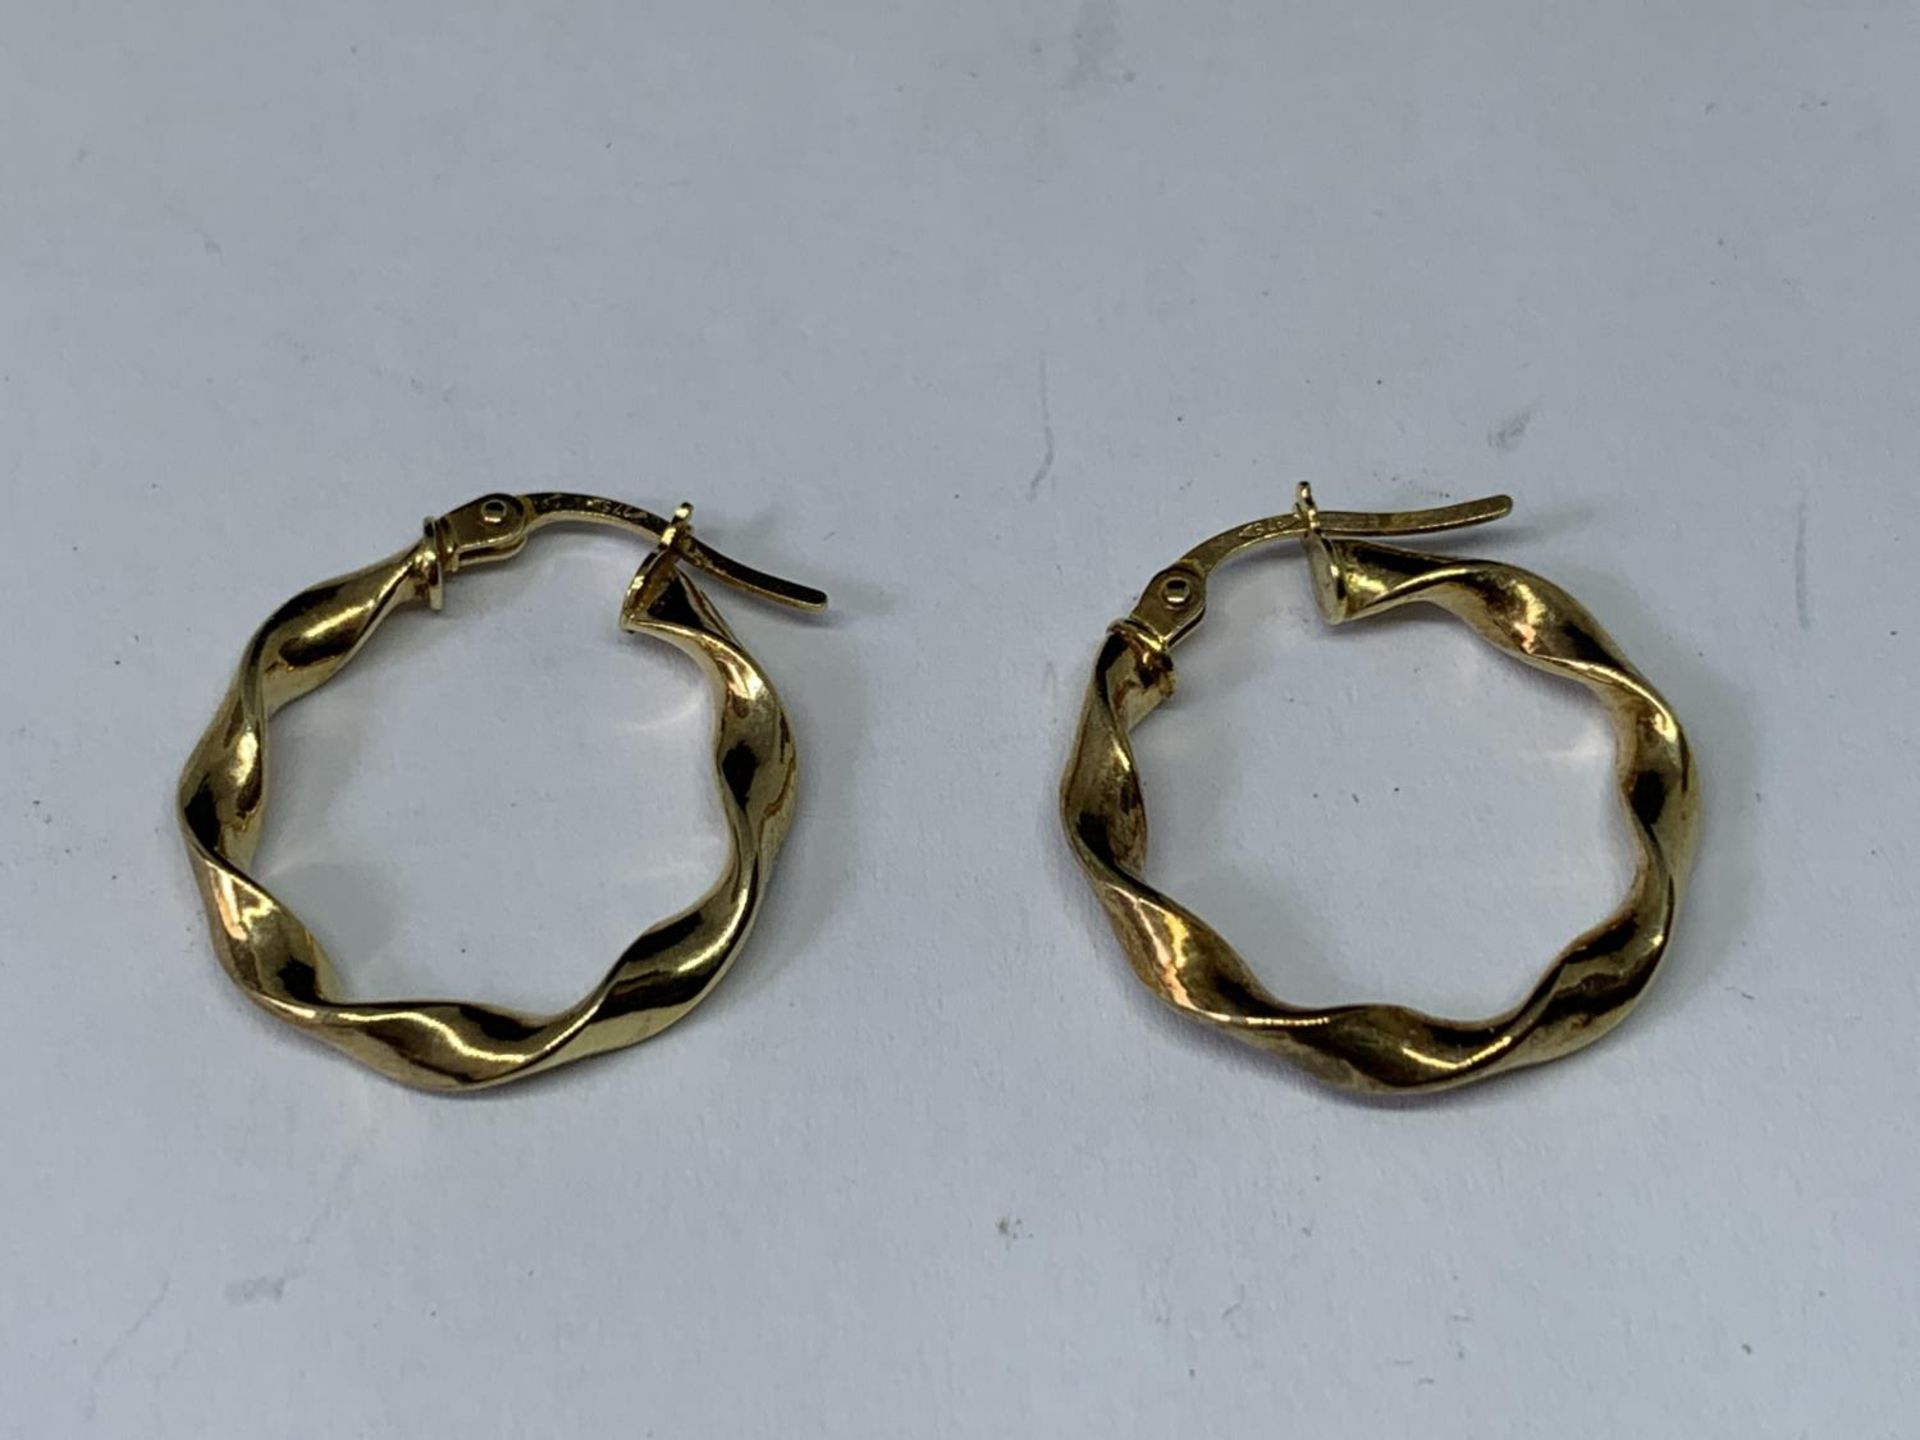 A PAIR OF MARKED 375 GOLD TWIST EARRINGS